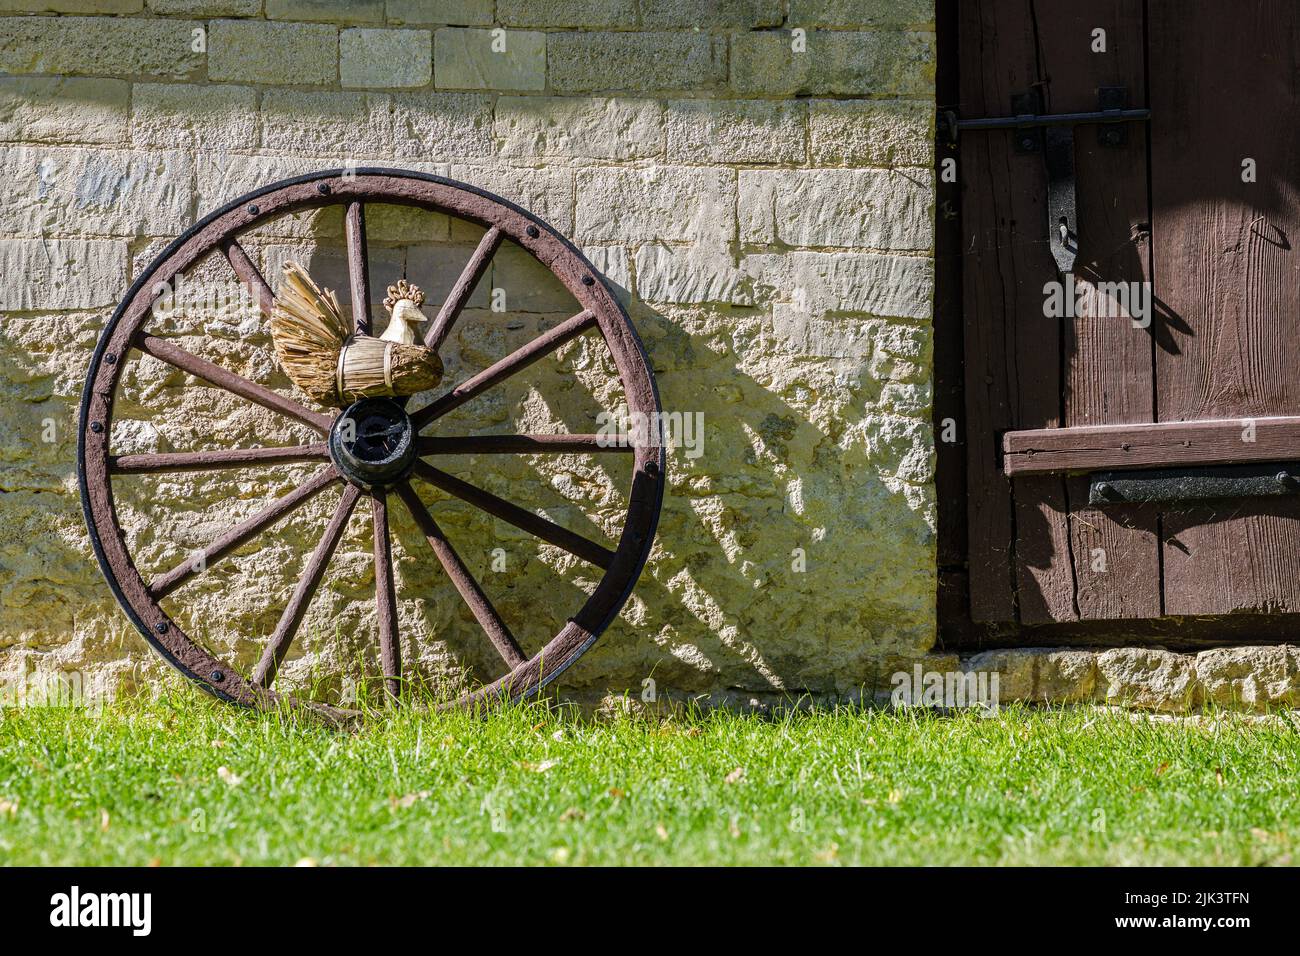 Rural scene, wooden wheel from carriage against brick wall and wooden door Stock Photo